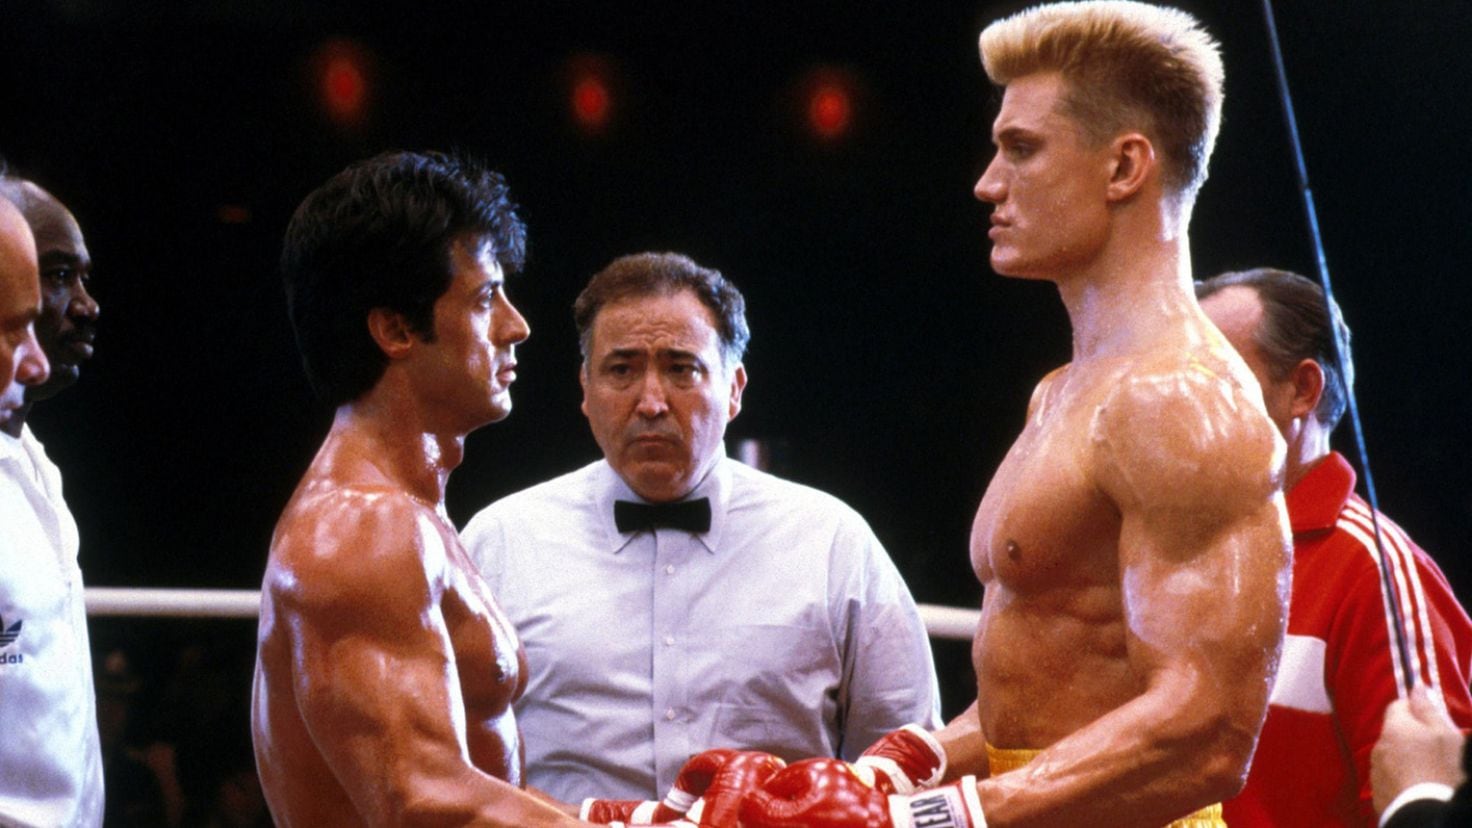 5 curiosities and tales you should know about “Rocky IV”, a movie set at Christmas